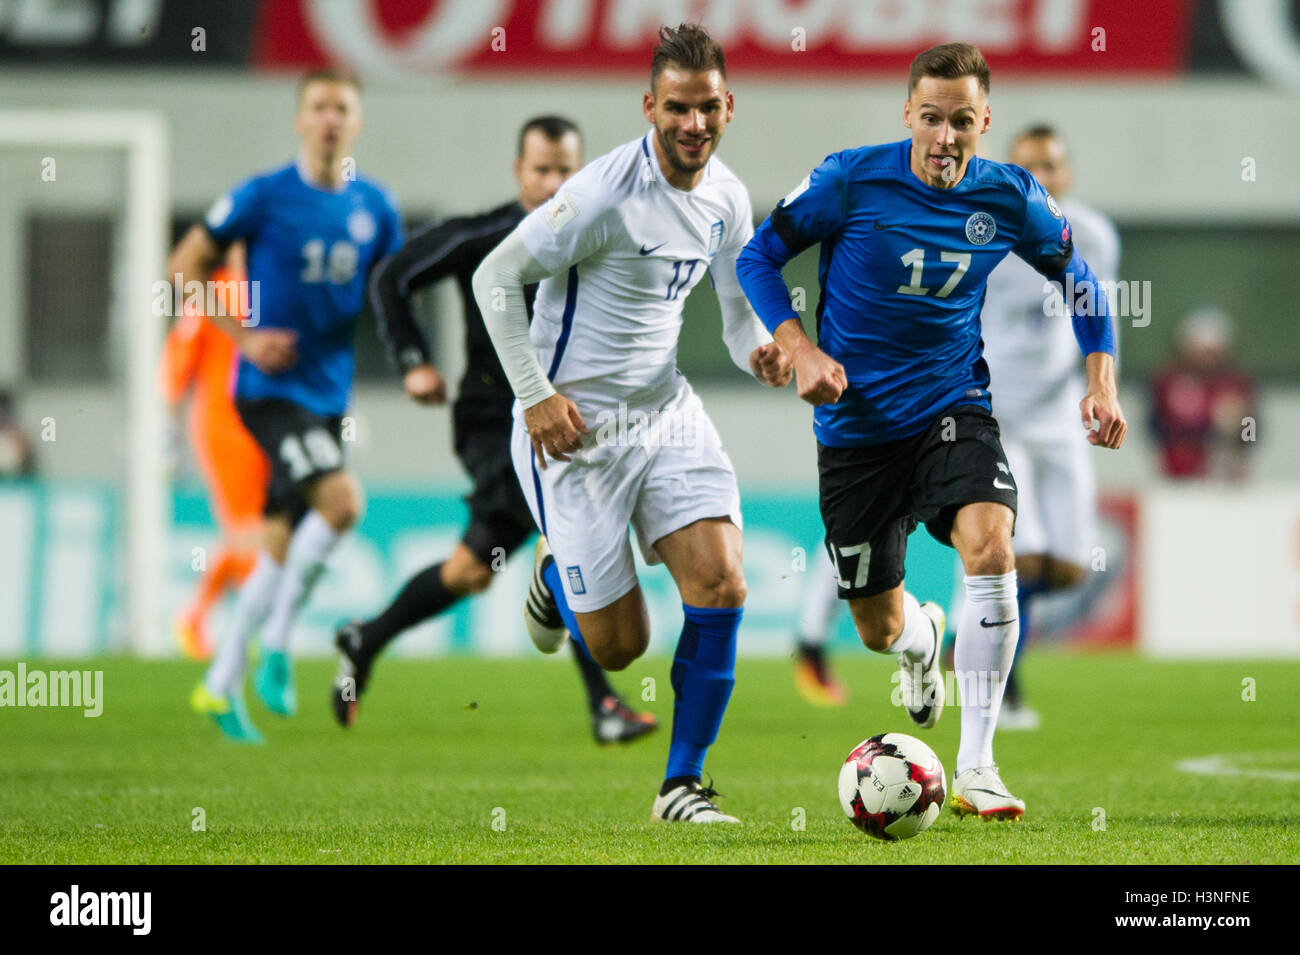 Tallinn, Estonia, 10th October 2016. Panagiotis Tachtsidis (L) of Greece fights for the ball with Siim Luts  (R) of Estonia during the FIFA World Cup 2018 qualifying match between Estonia and Greece Credit:  Nicolas Bouvy/Alamy Live News Stock Photo